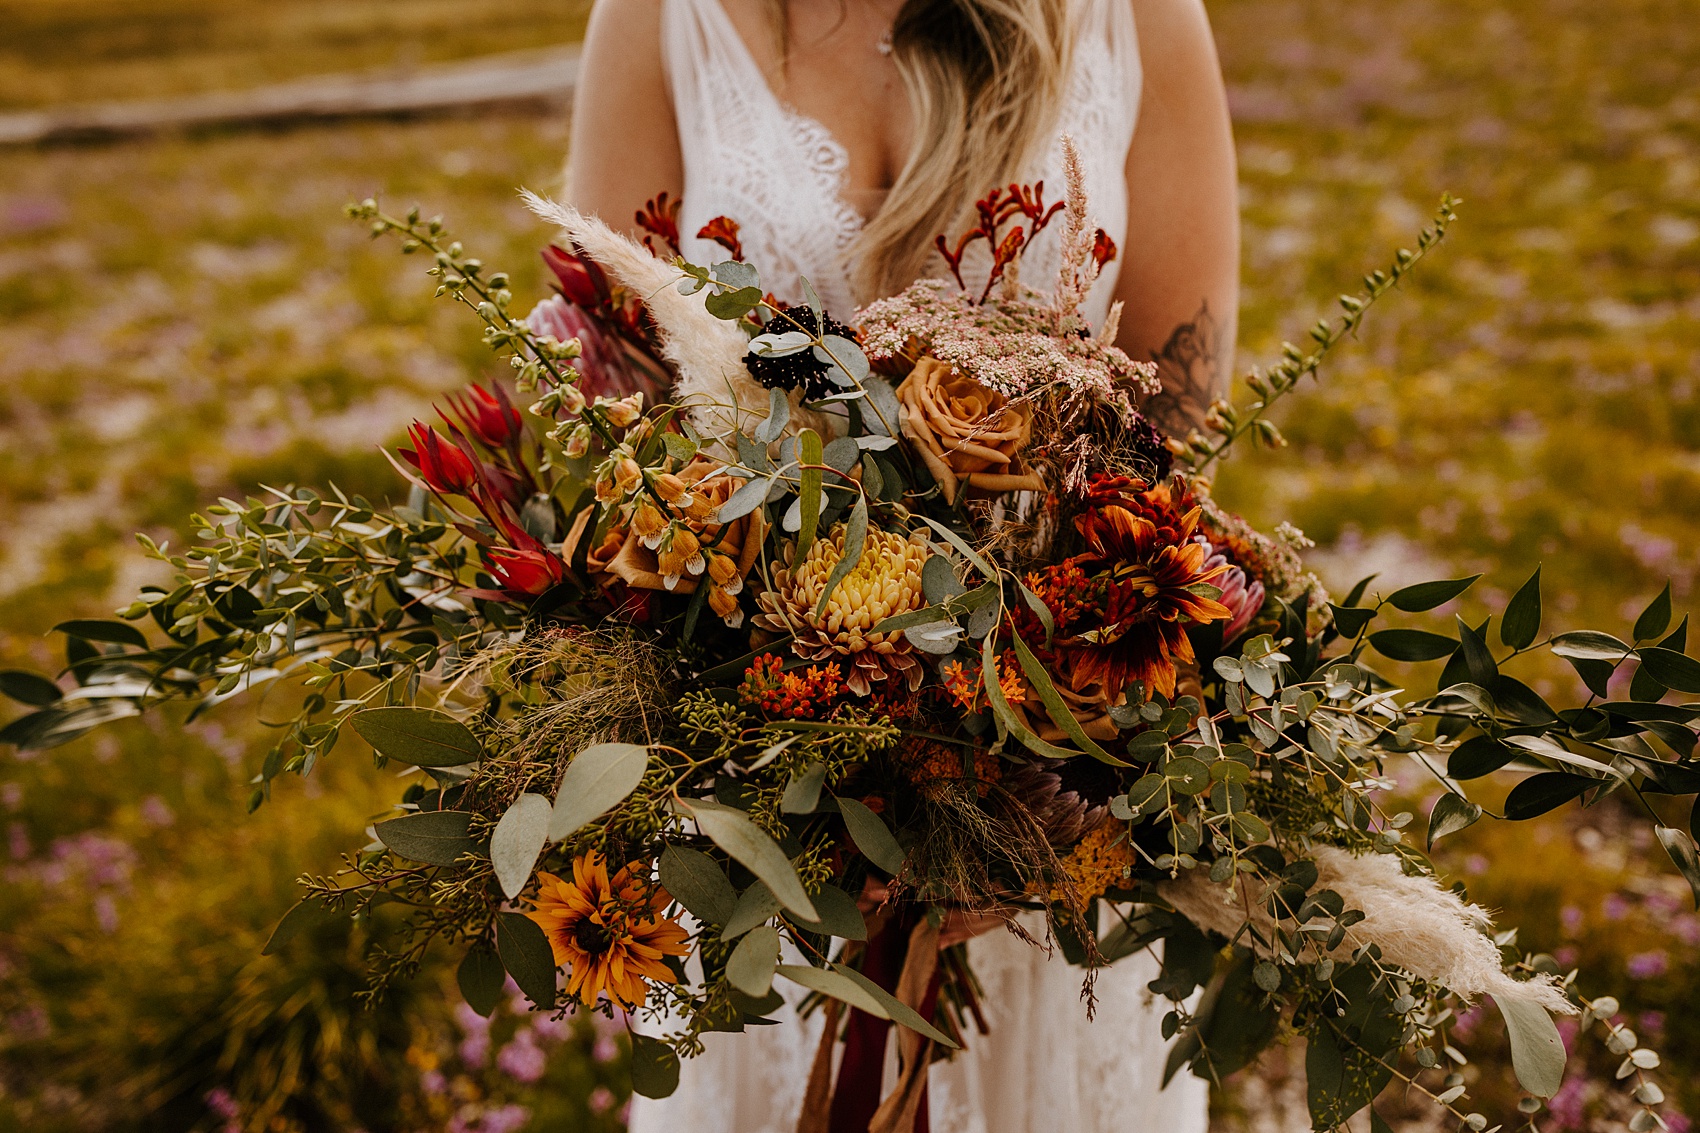 mountain meadow elopement bend oregon sparks lake cascade lakes highway victoria carlson woodland floral